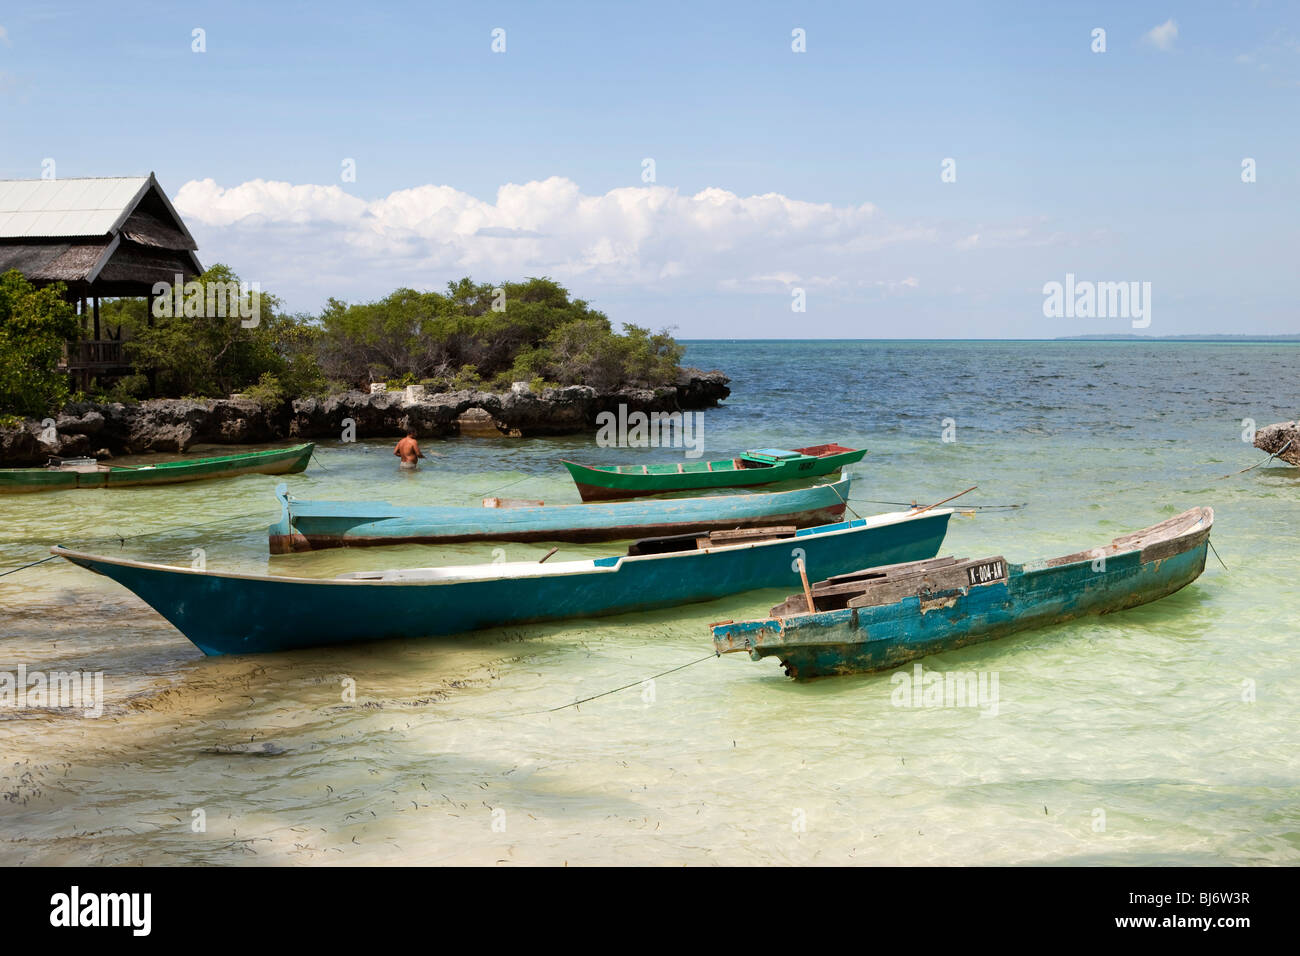 Indonesia, Sulawesi, Hoga Island, small dugout boats moored in small bay Stock Photo